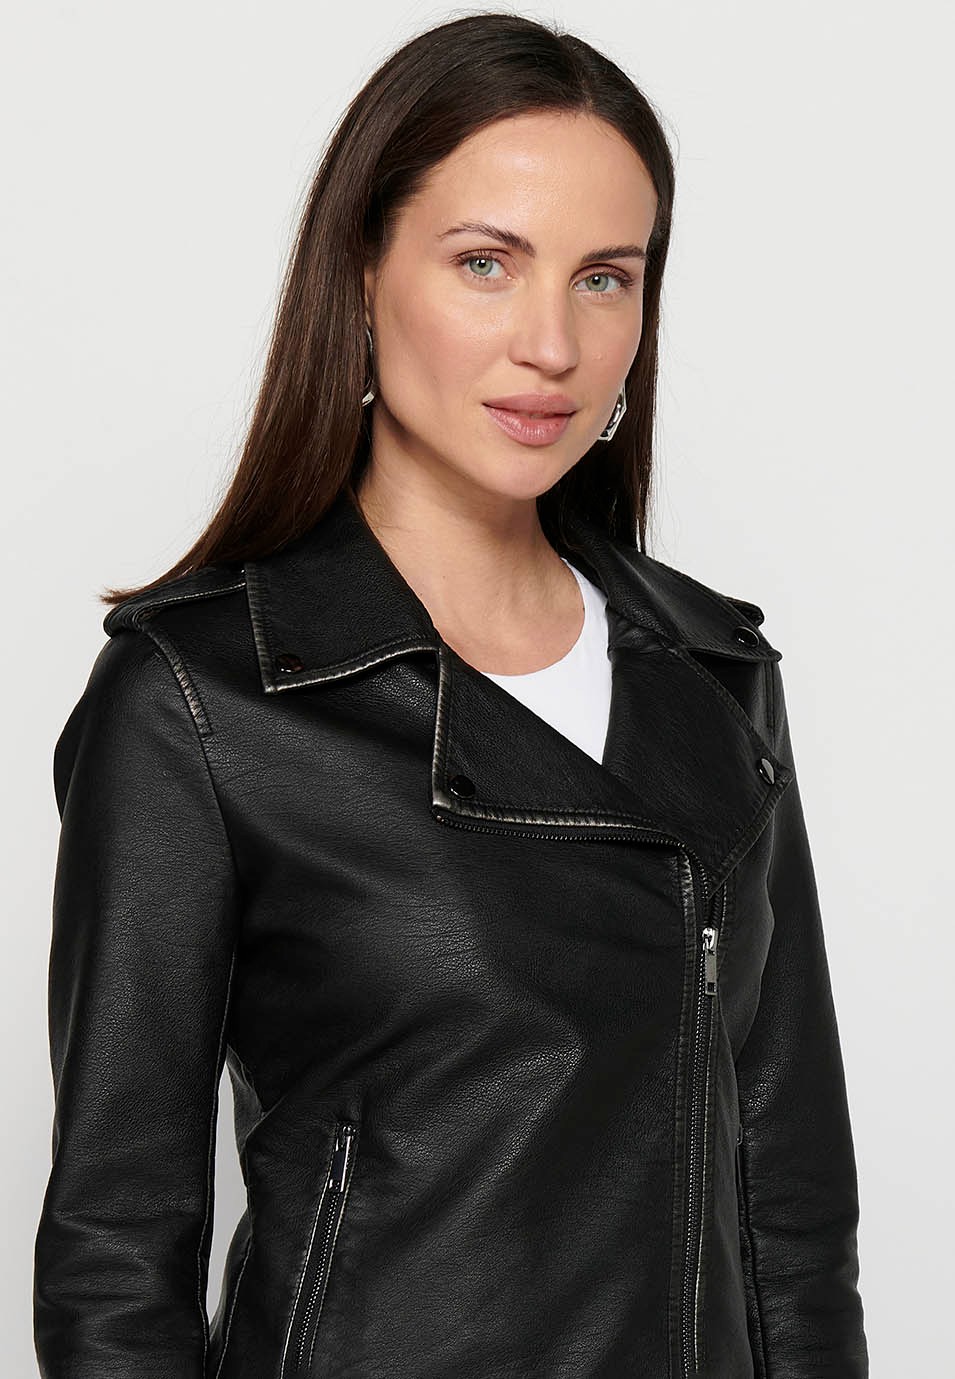 Leather-effect double-breasted jacket with lapel collar and front zipper closure in Black for Women 6